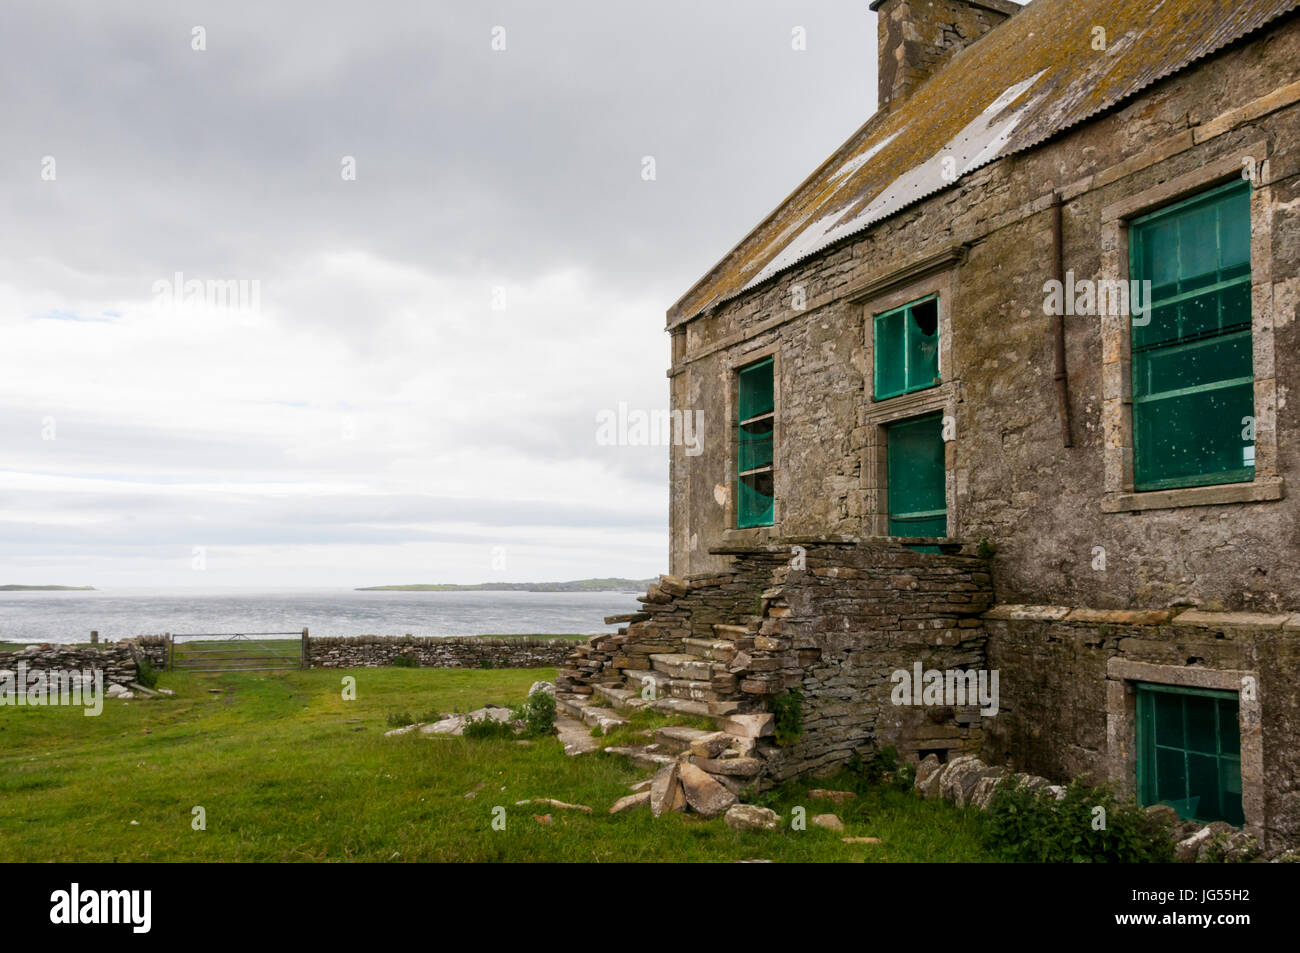 The Hall of Clestrain on Orkney Mainland was the birthplace of Arctic explorer John Rae. DETAILS IN DESCRIPTION. Stock Photo